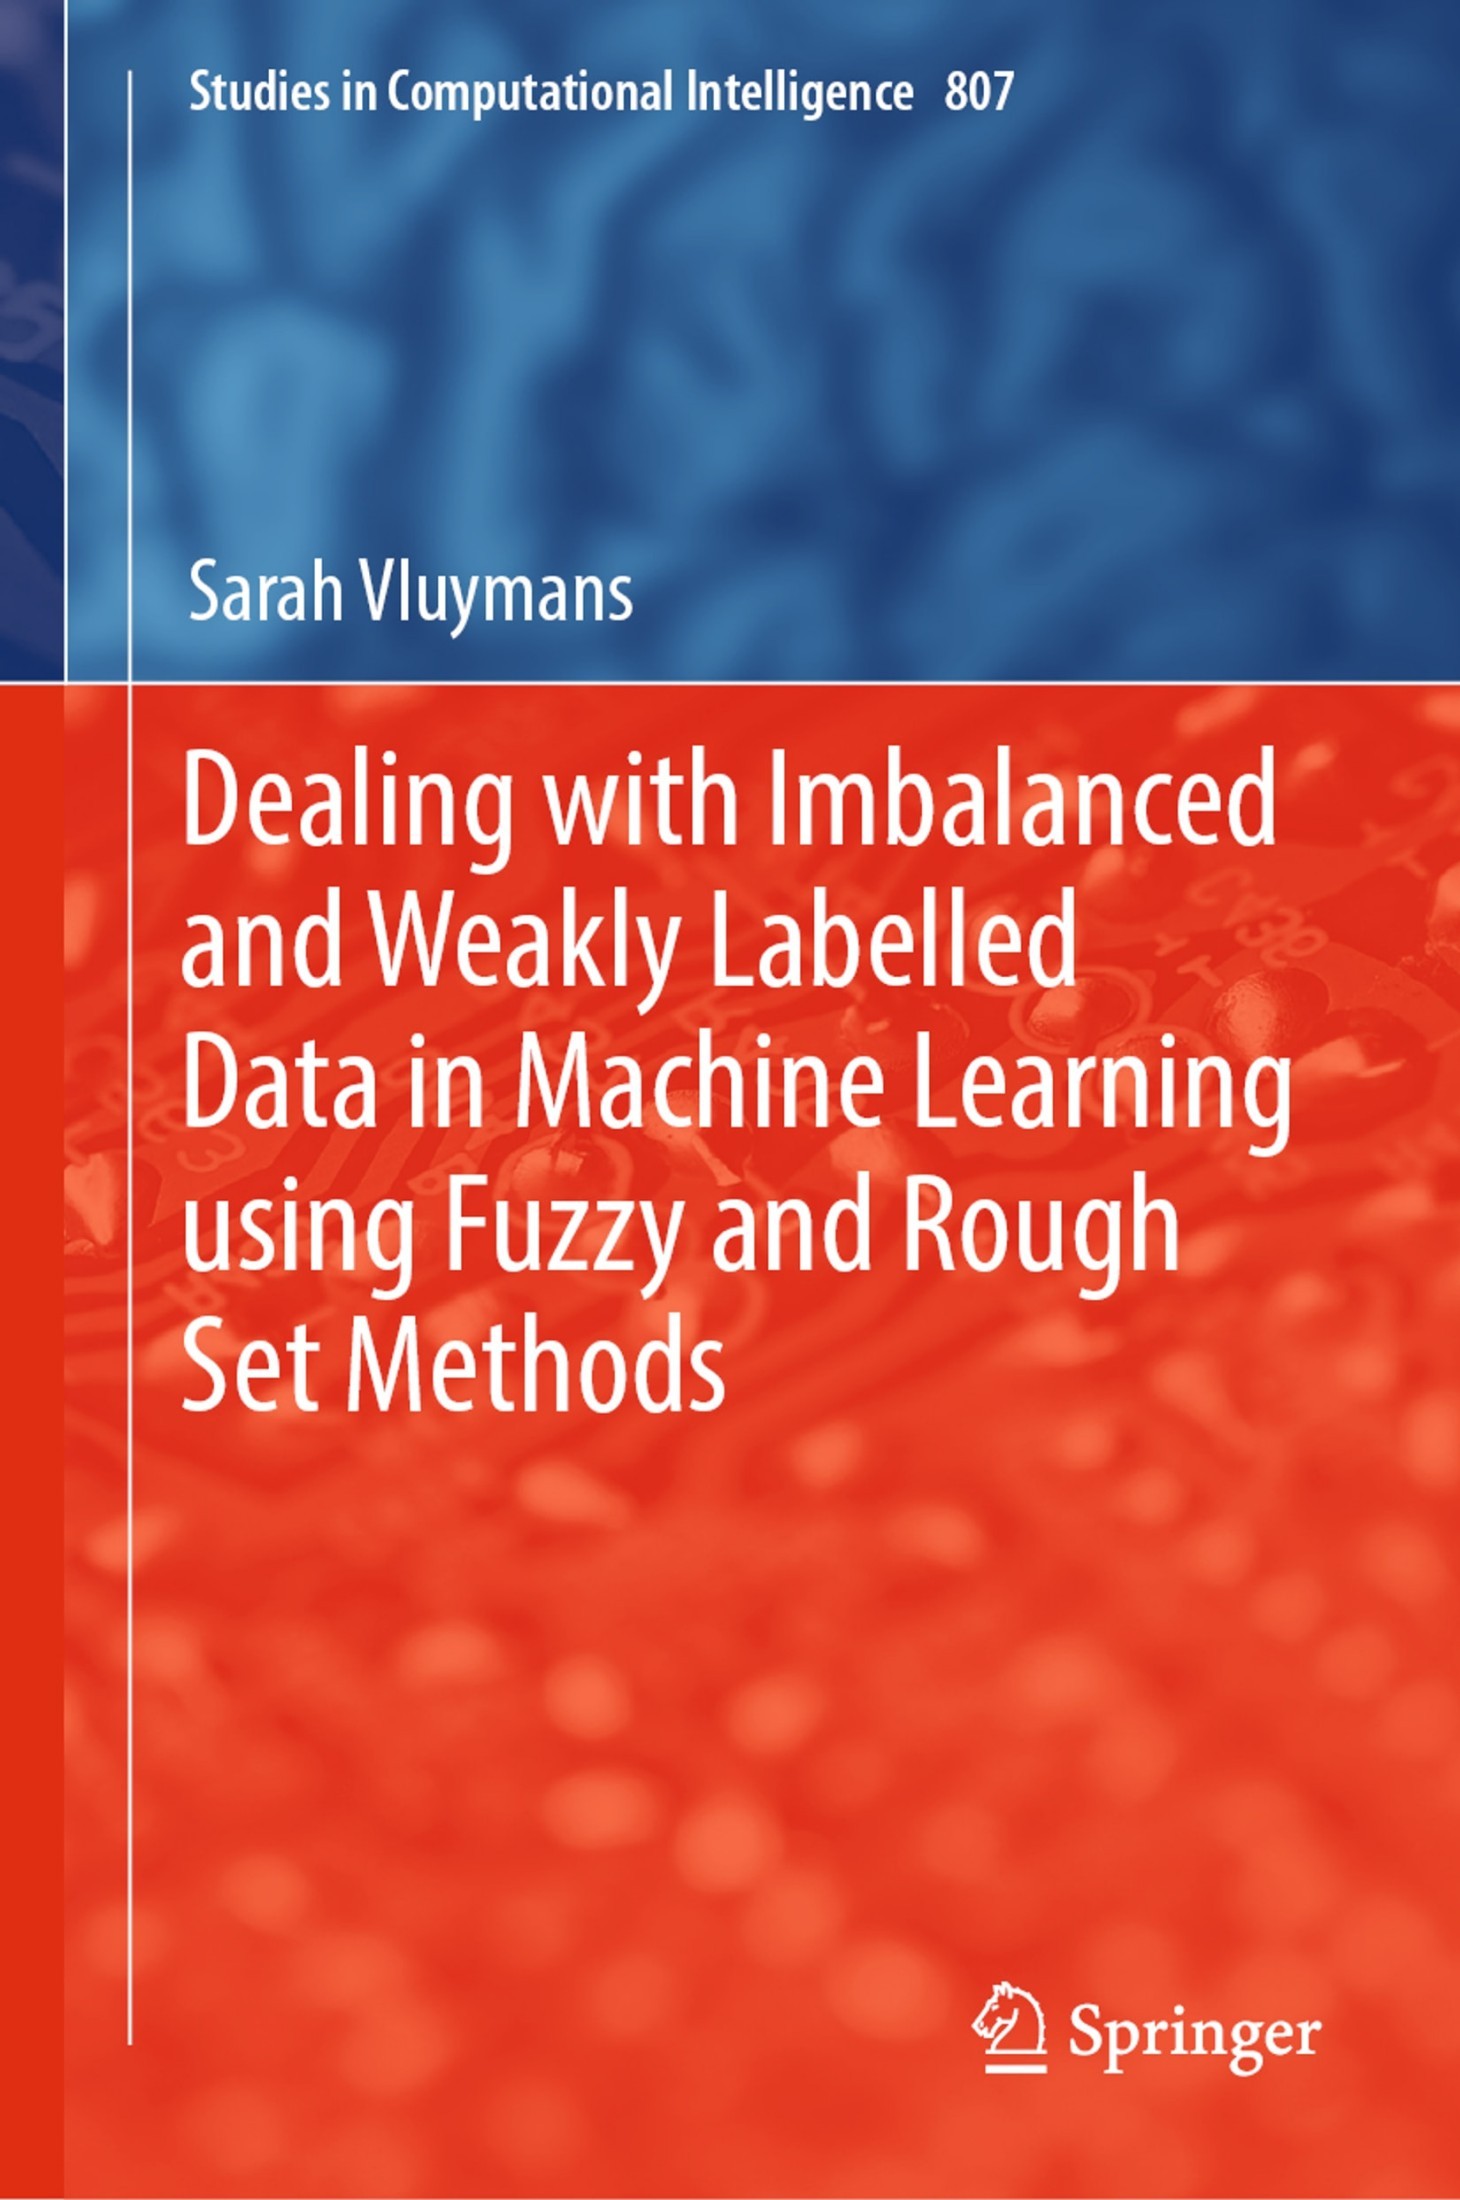 Dealing with Imbalanced and Weakly Labelled Data in Machine Learning using Fuzzy and Rough Set Methods